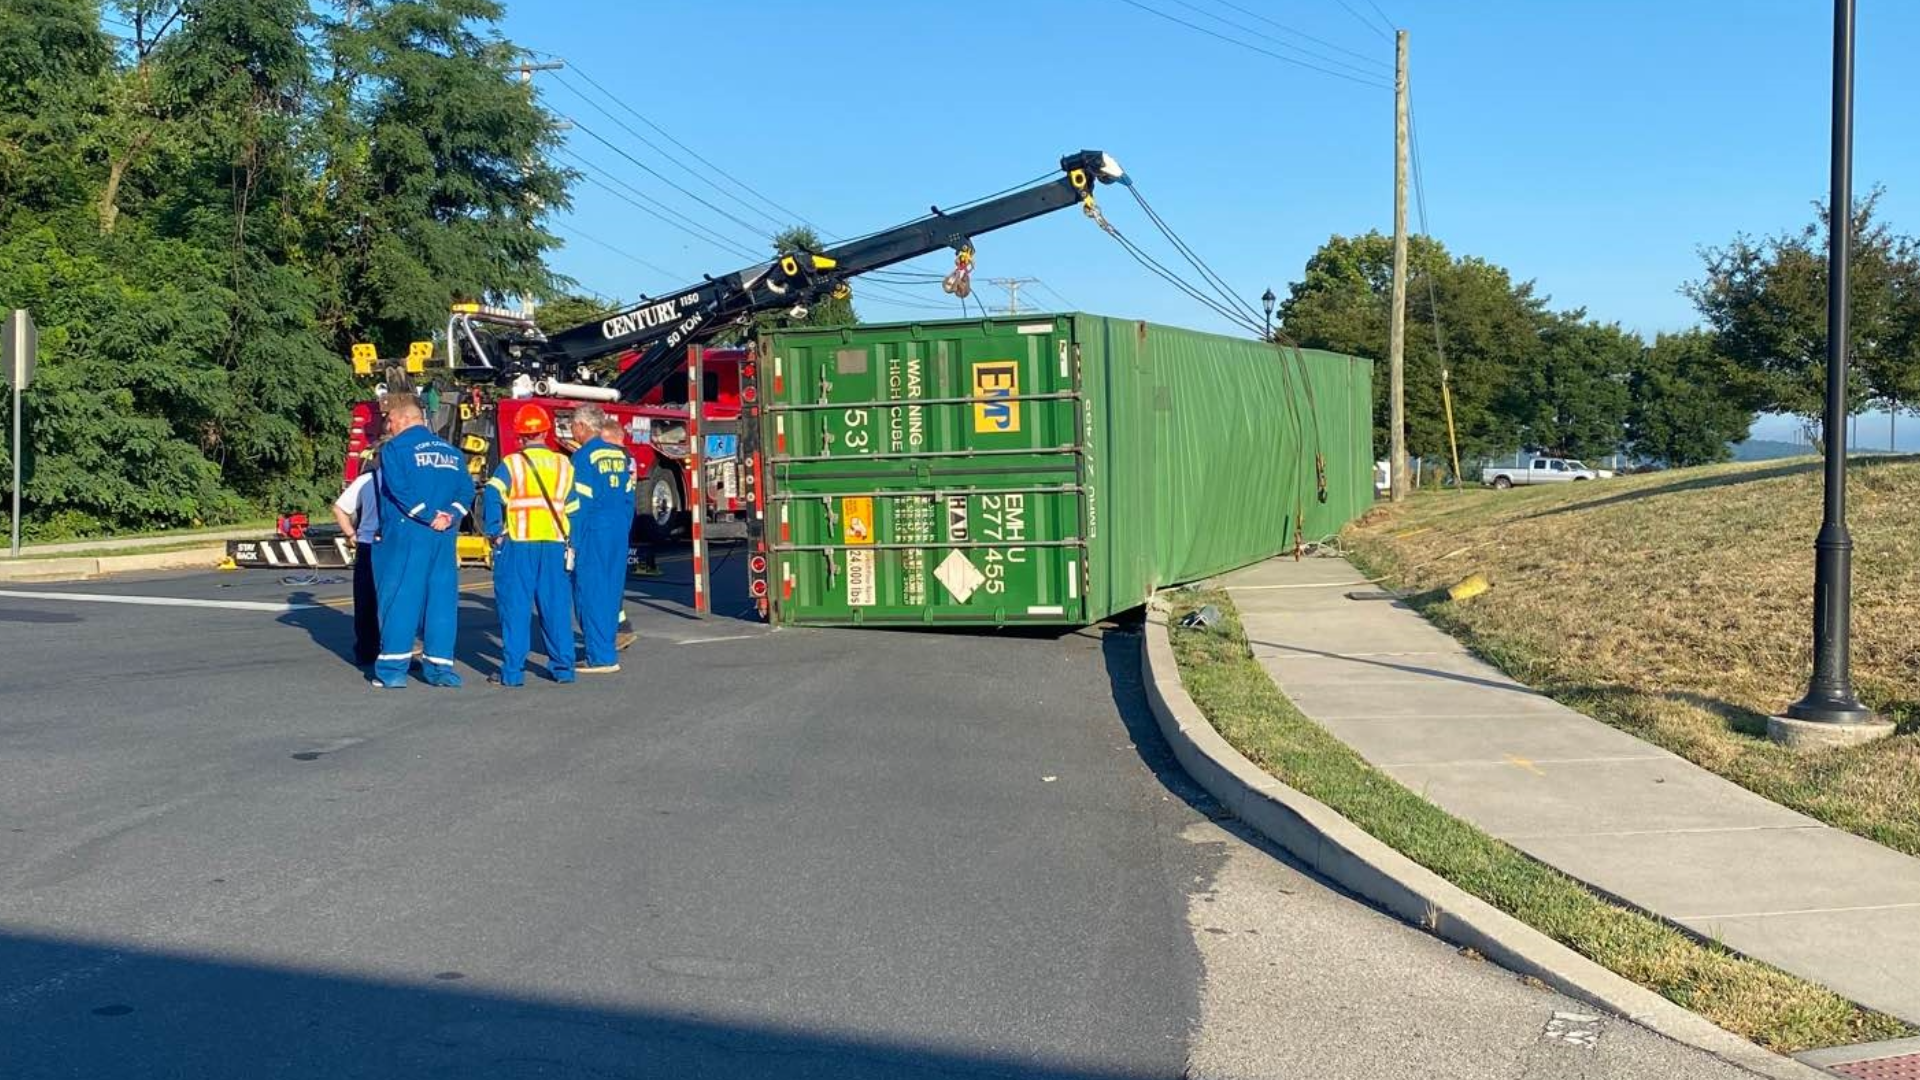 The tractor trailer overturned in the 3000 block of Espresso Way.